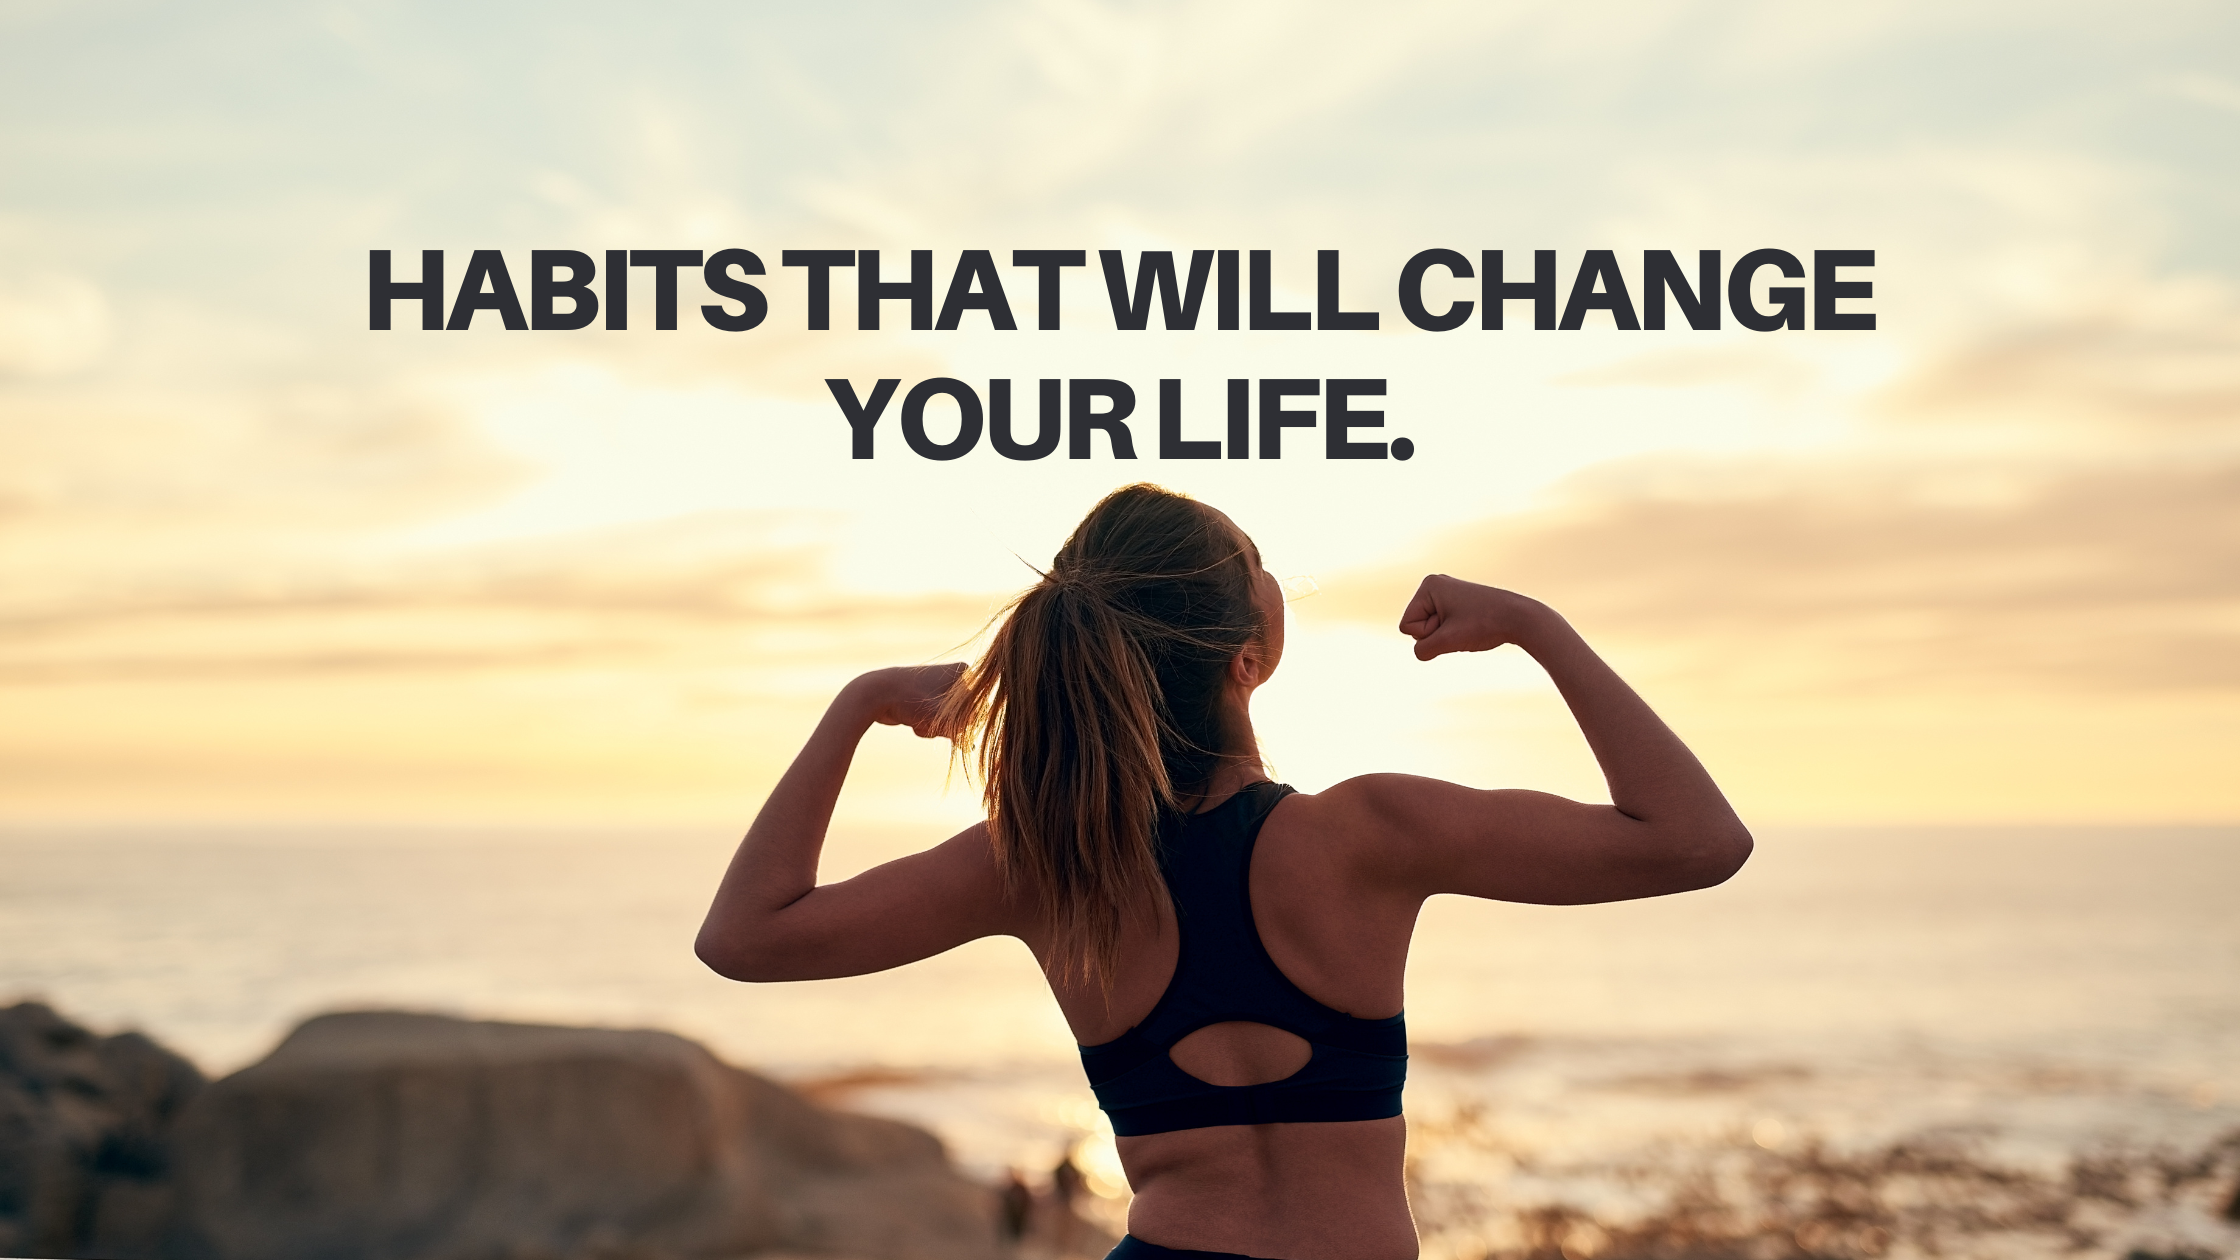 Habits that will change your life.